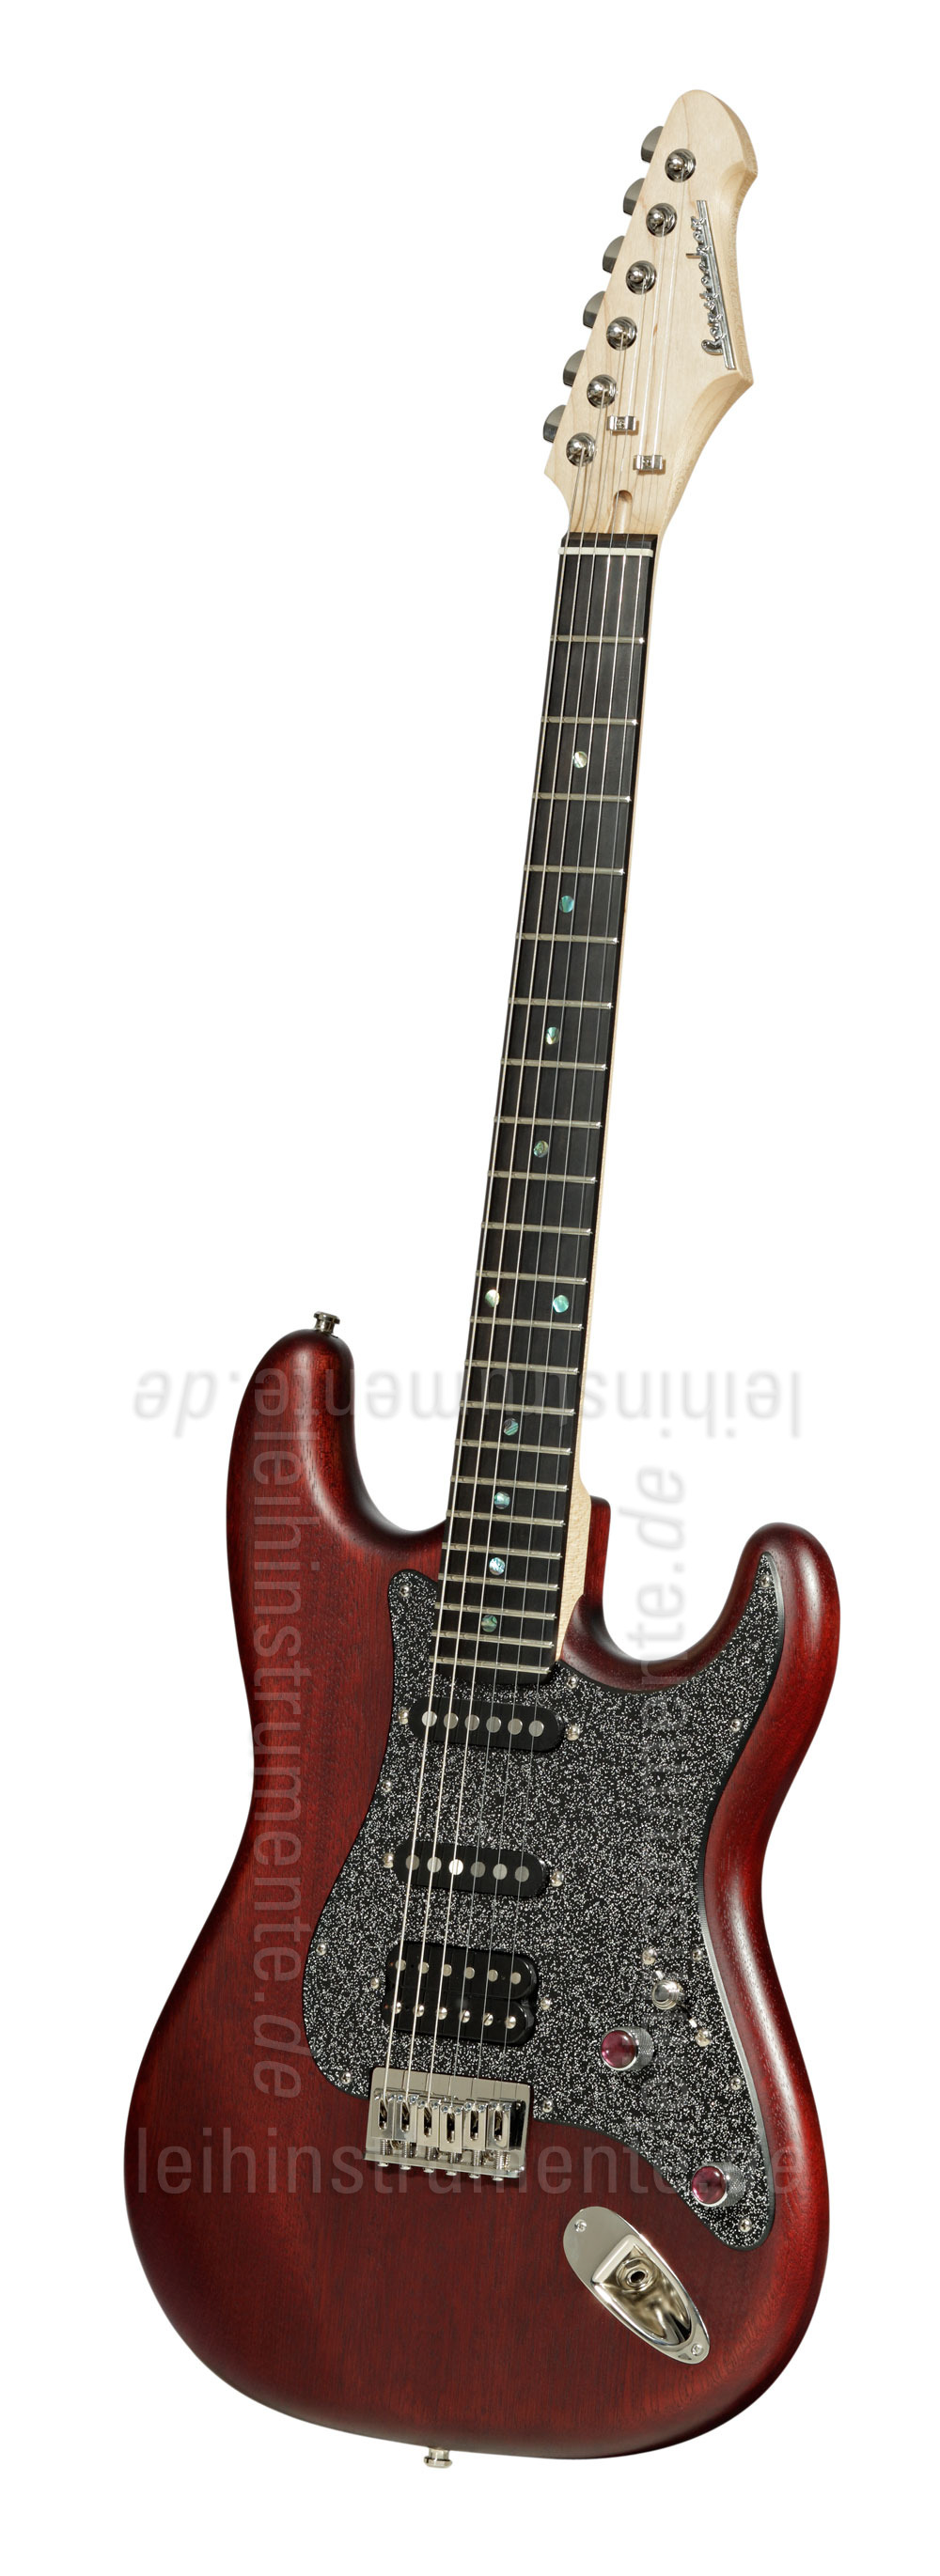 to article description / price Electric Guitar BERSTECHER Deluxe - Black Cherry / Black Sparkle + hard case - made in Germany